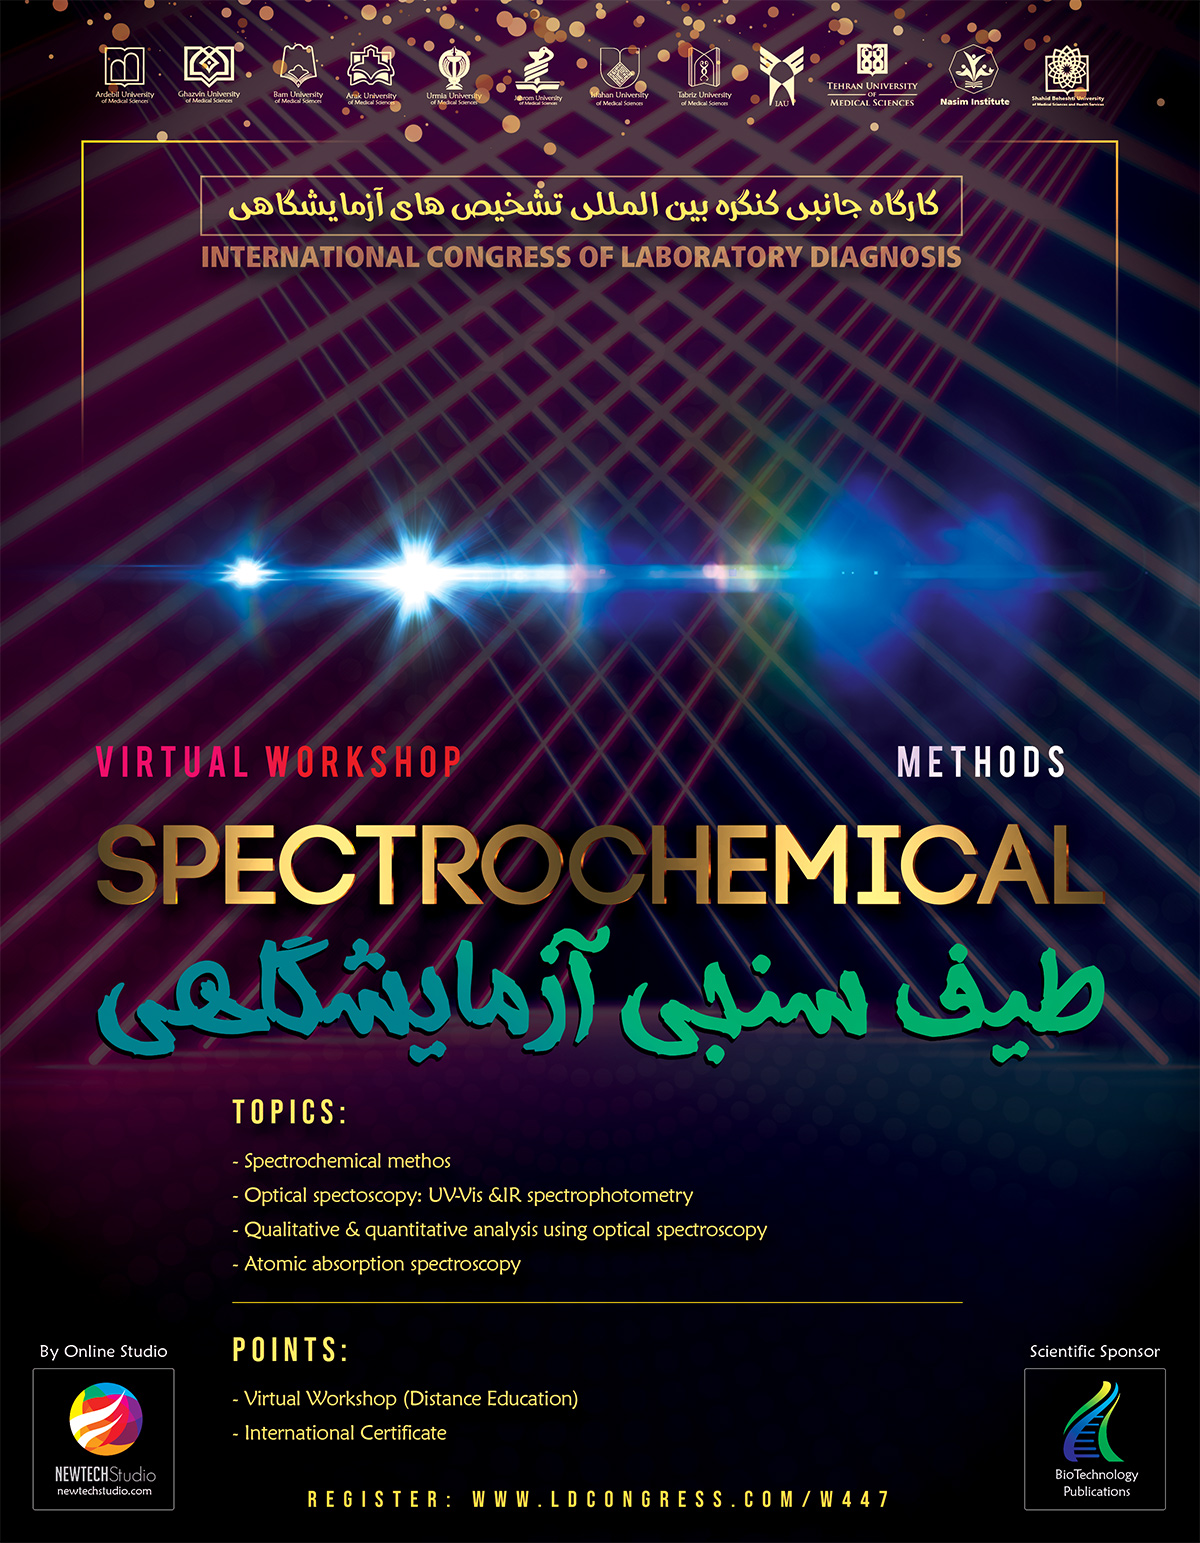 Spectrochemical methods and their application in qualitative and quantitative analysis